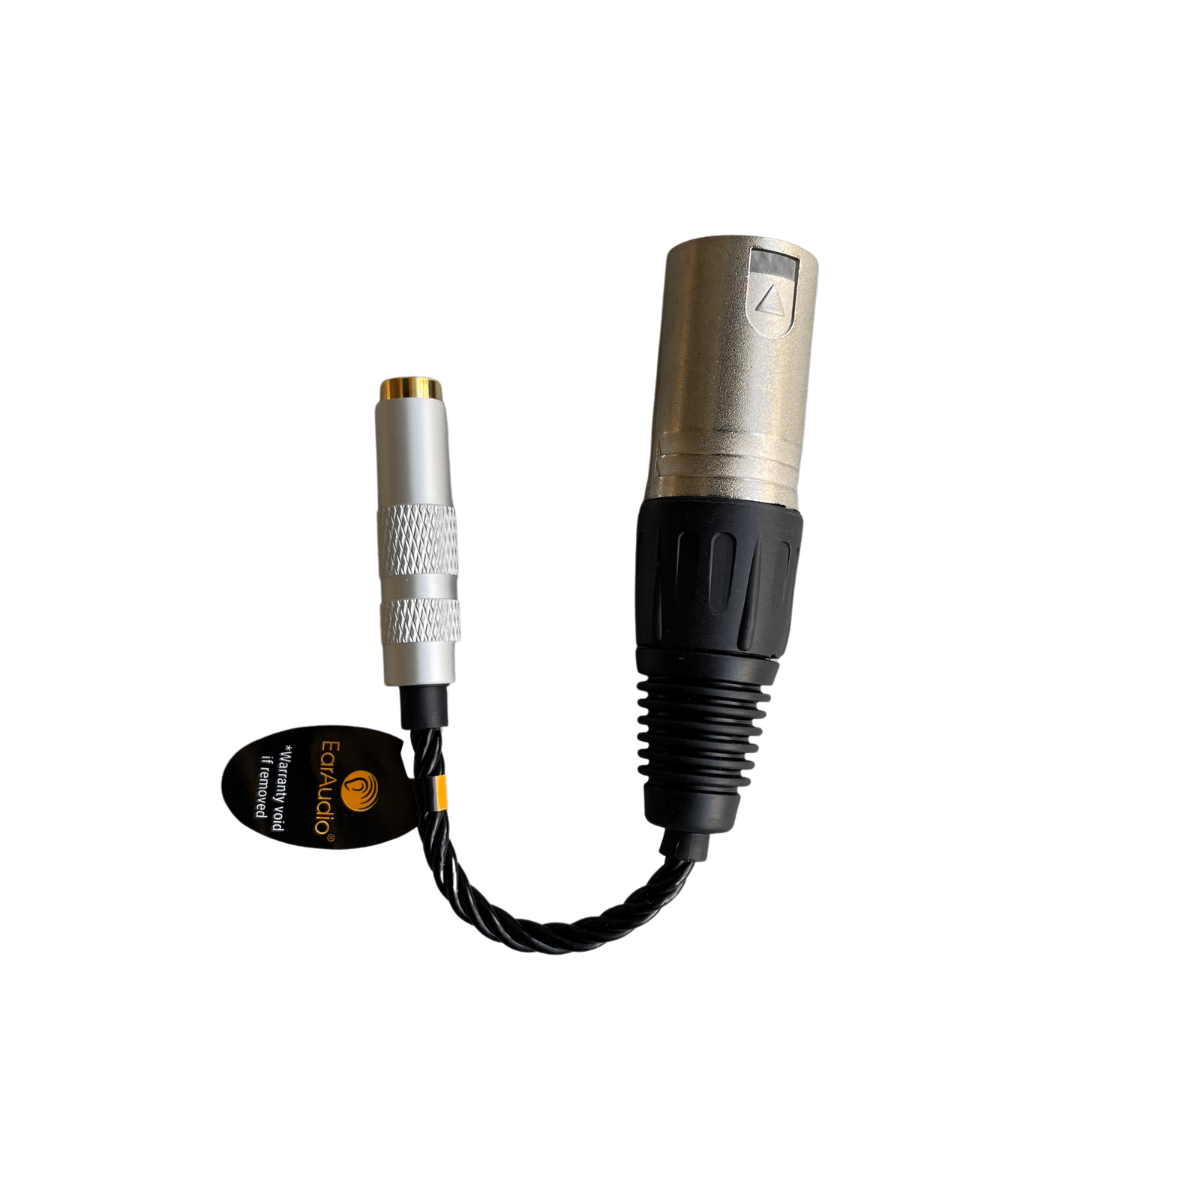 EarAudio XLR male to 4.4mm female Adapter Cable